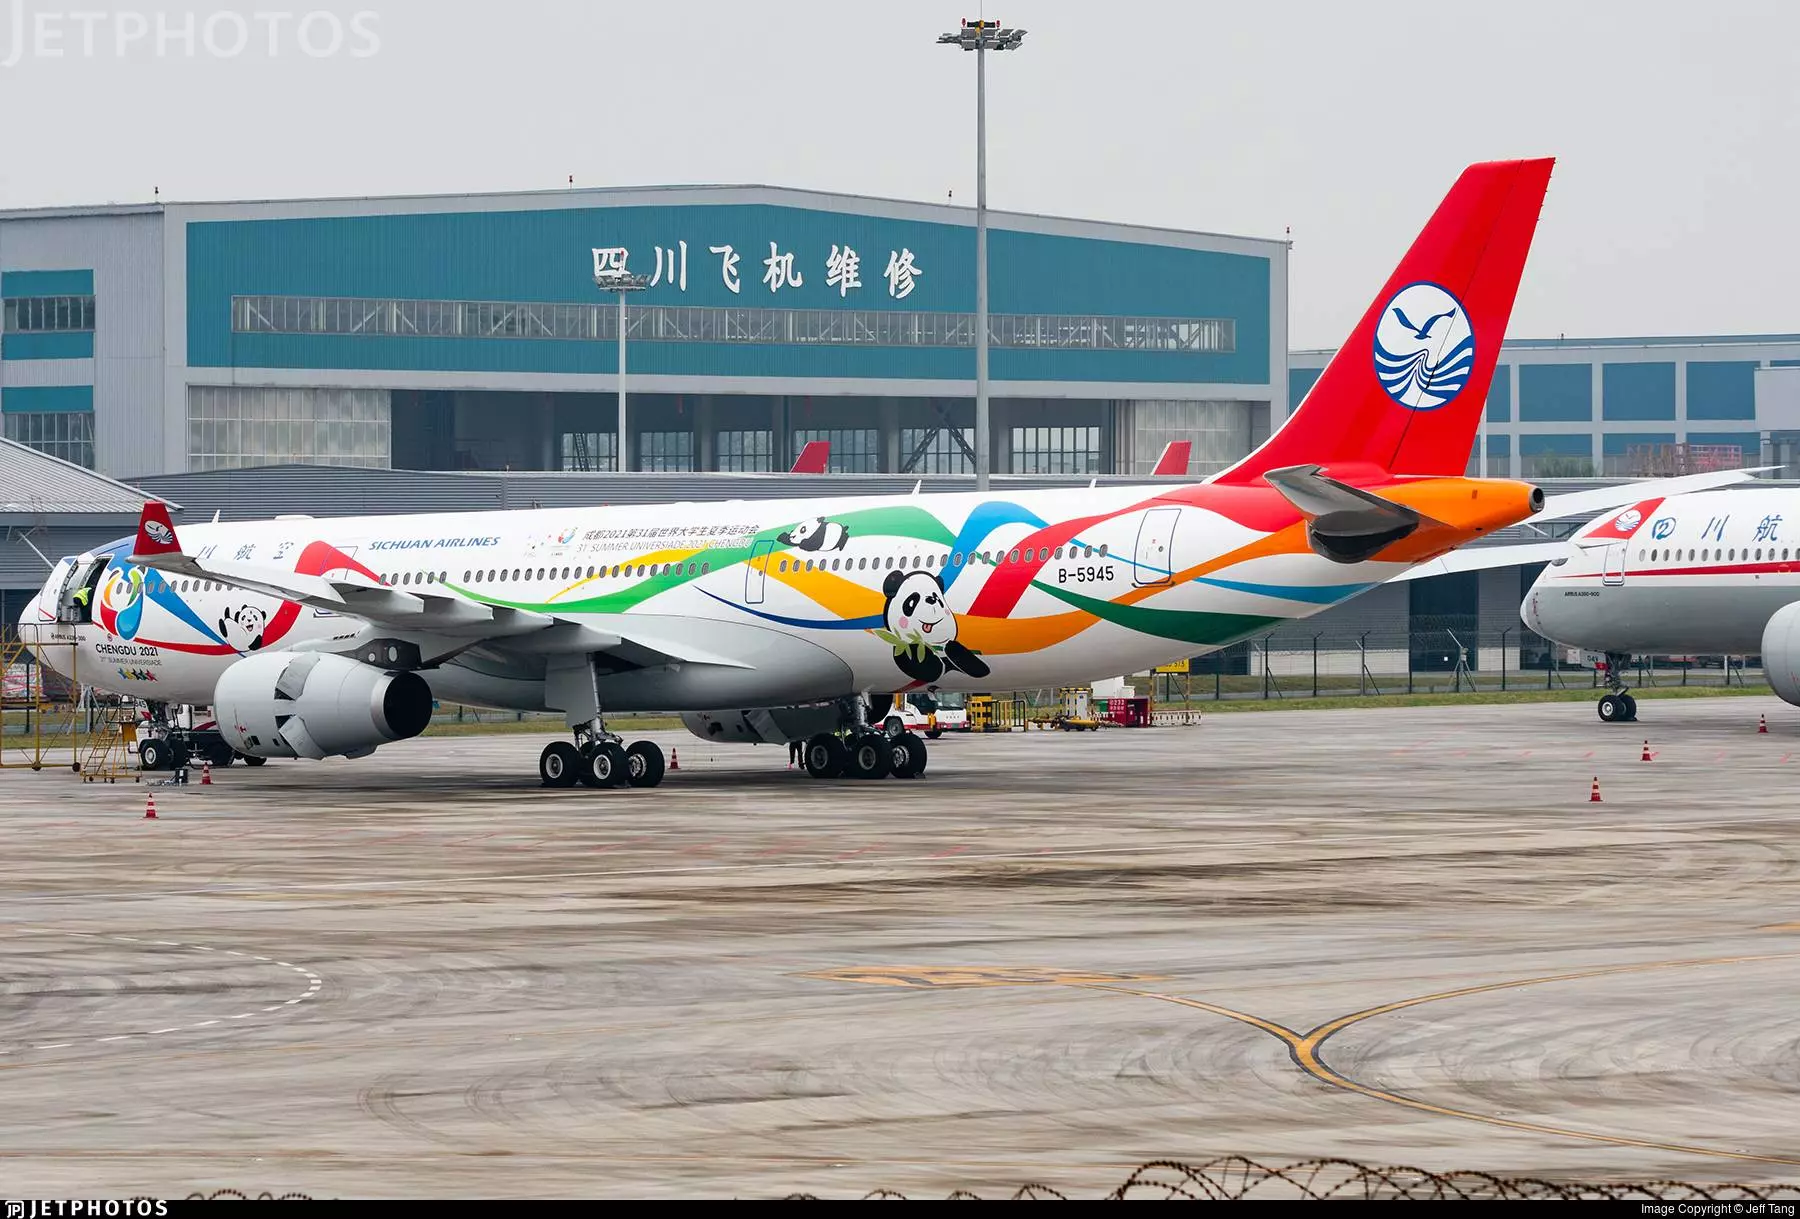 Sichuan airlines